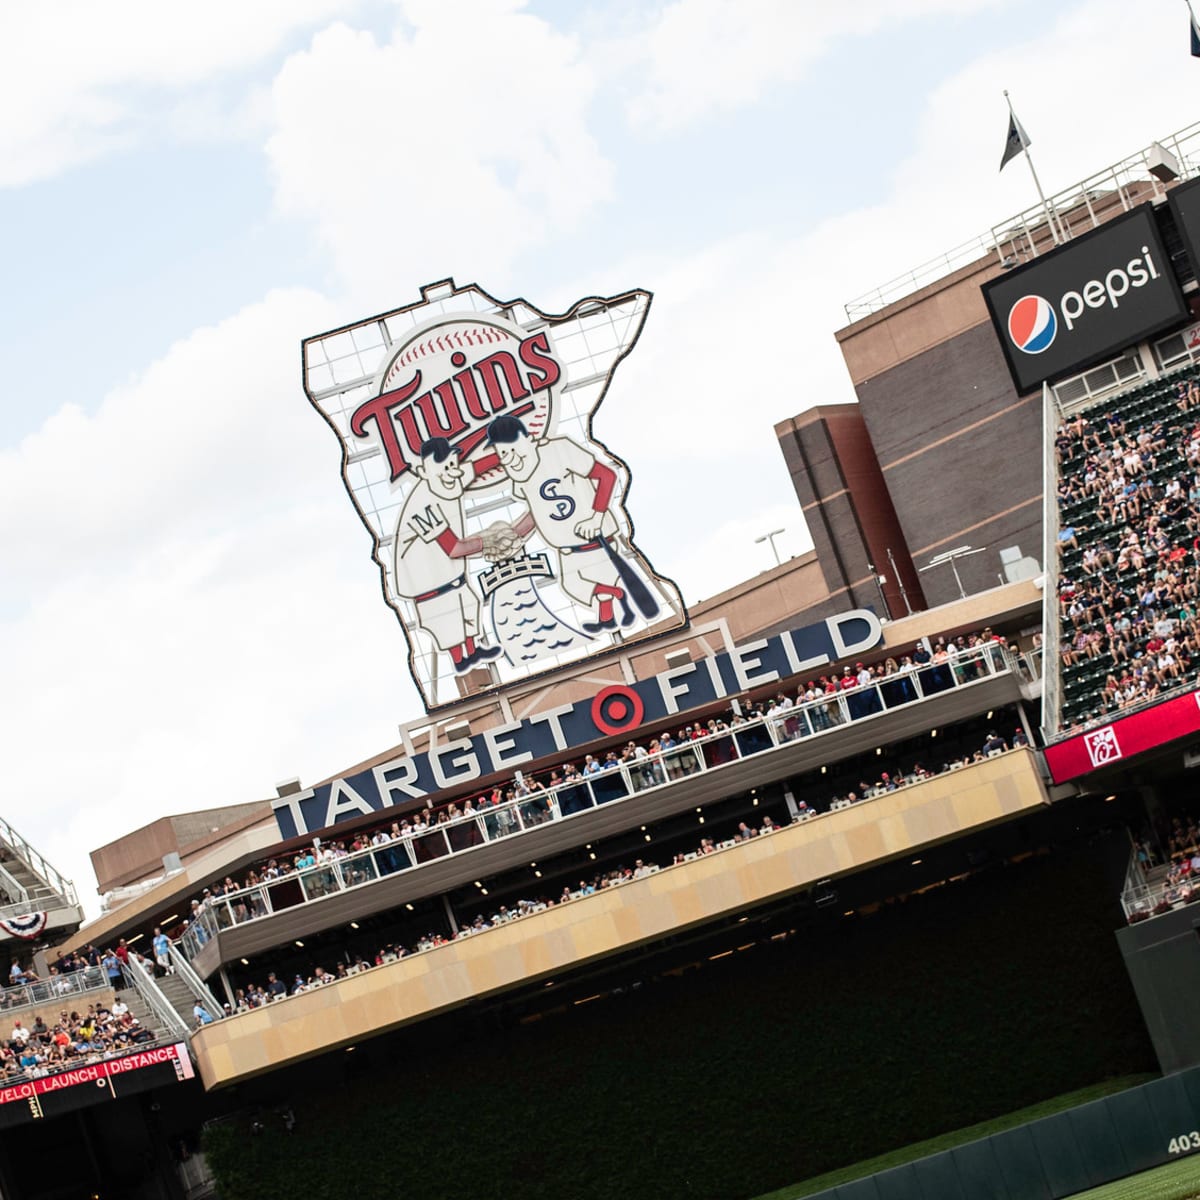 New restaurant at Target Field is Barrio – Twin Cities